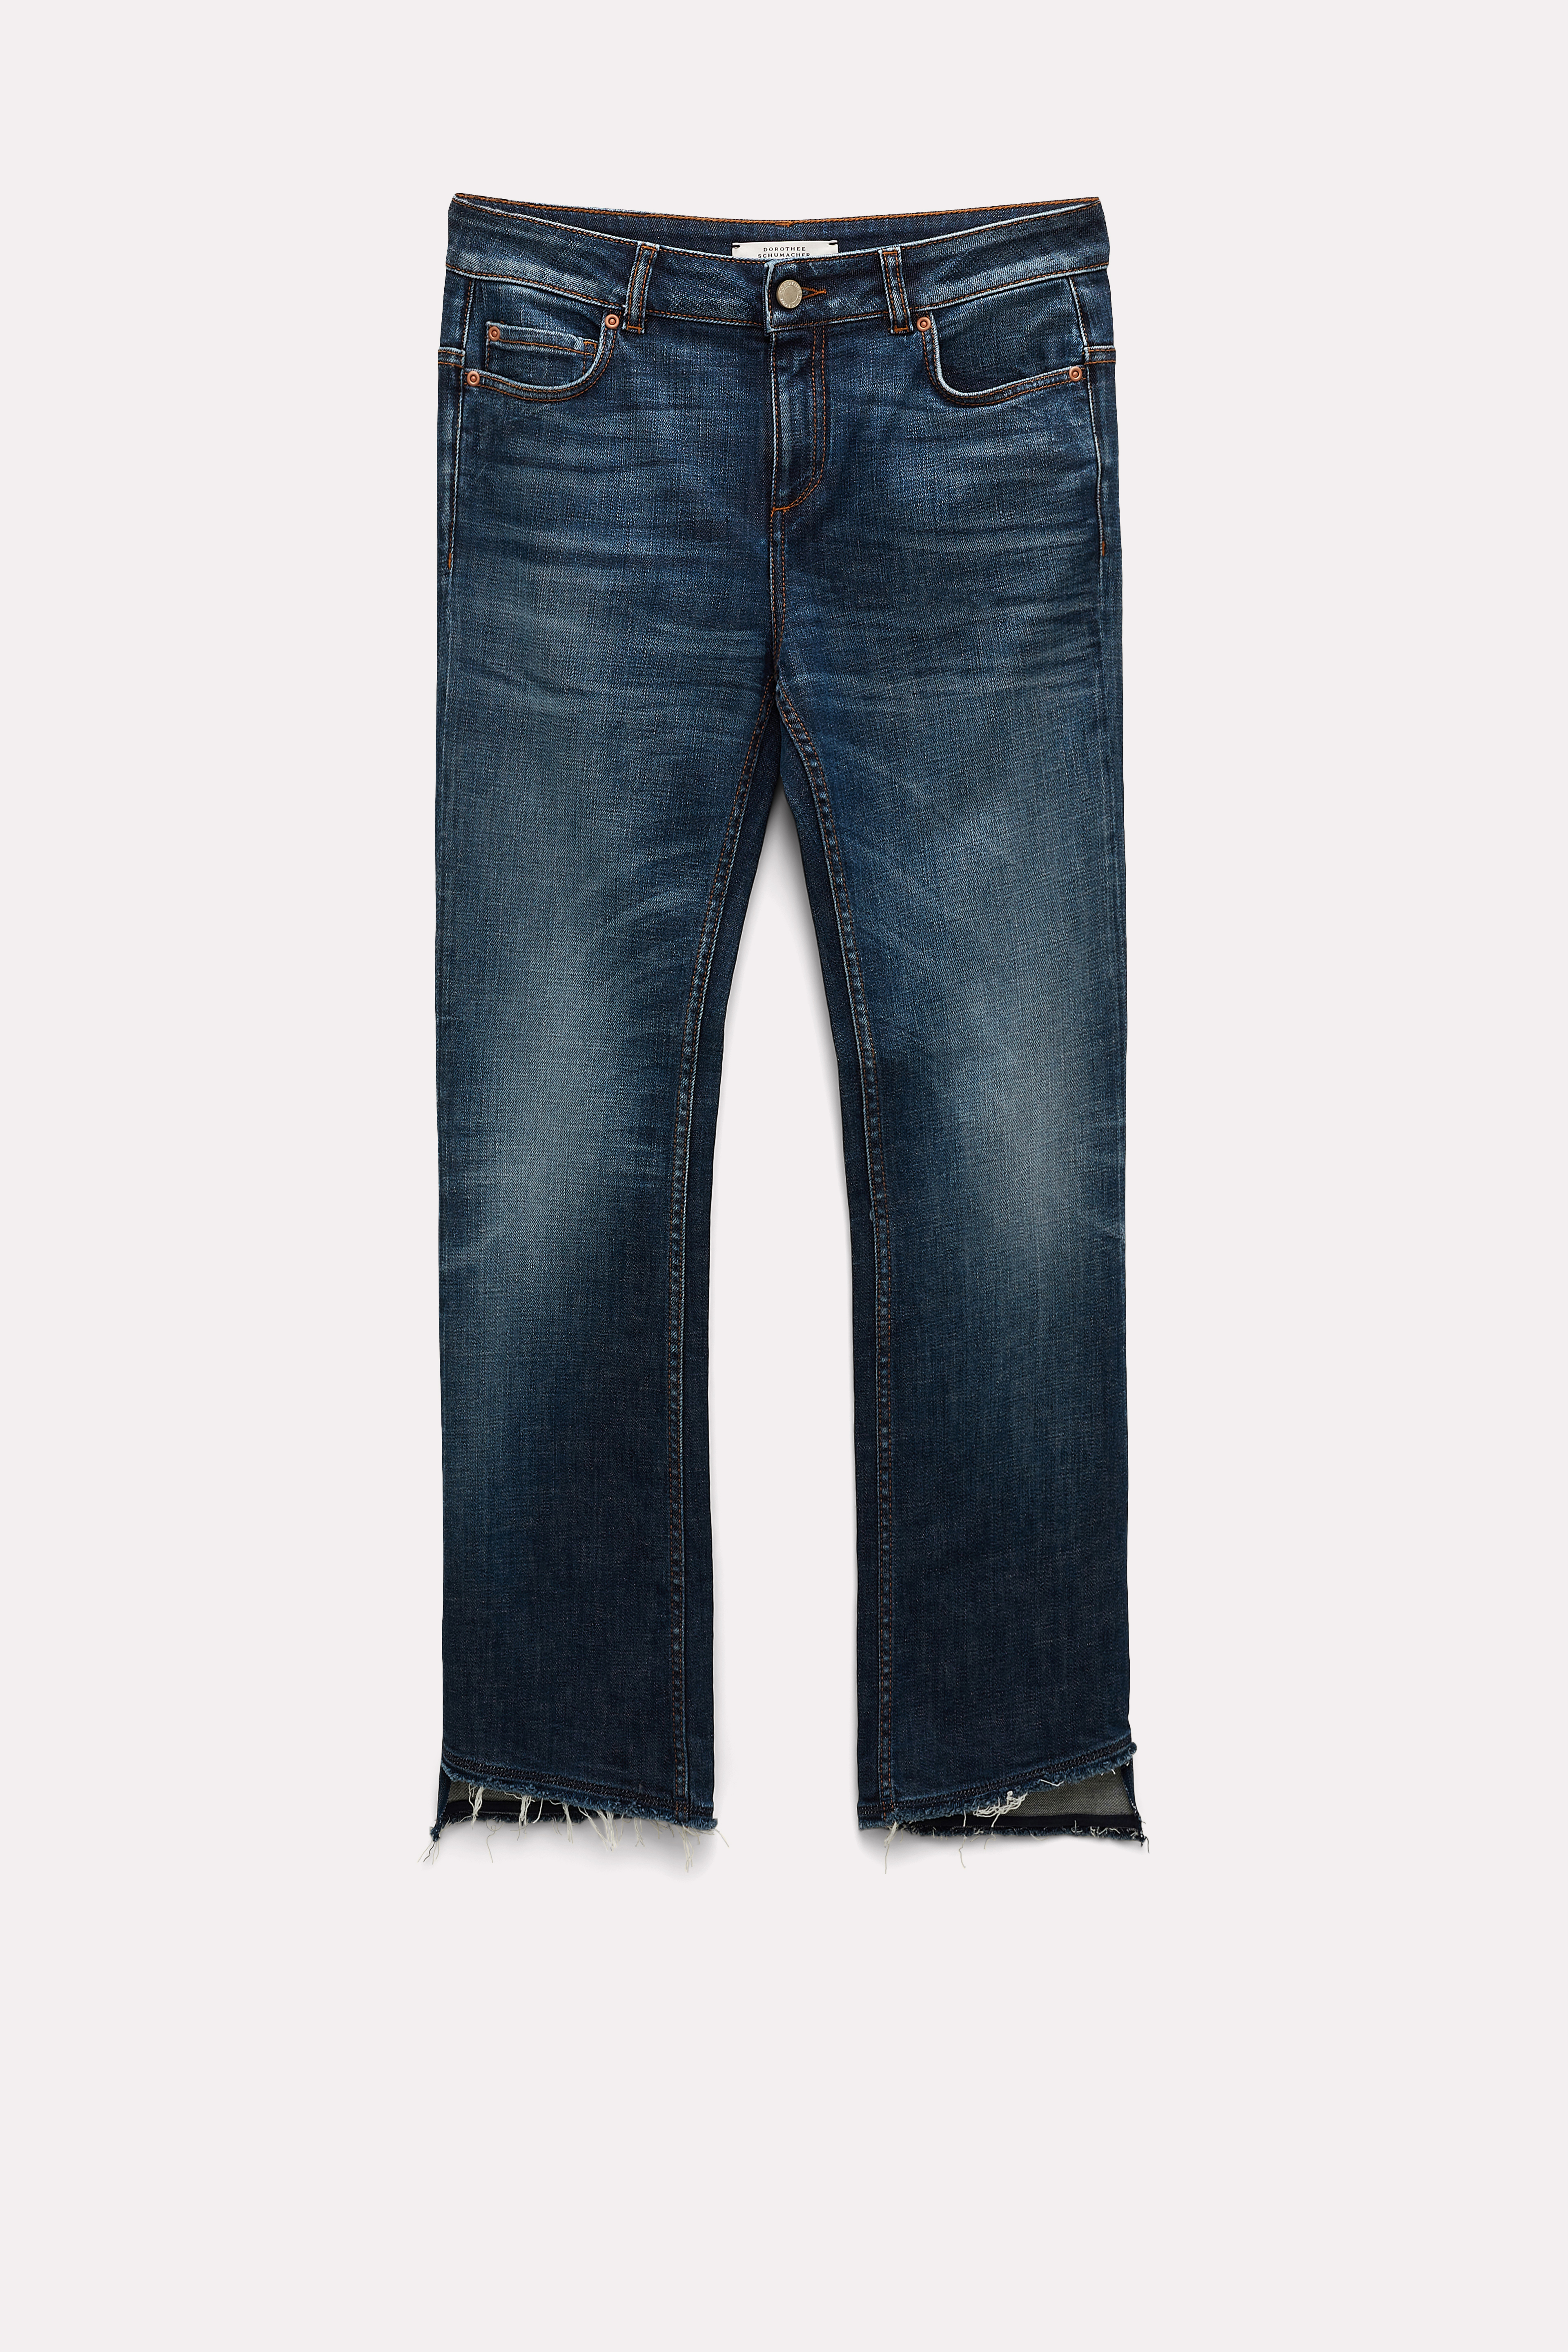 Dorothee Schumacher Flared Ankle Jeans With Cutoff Hem In Blue